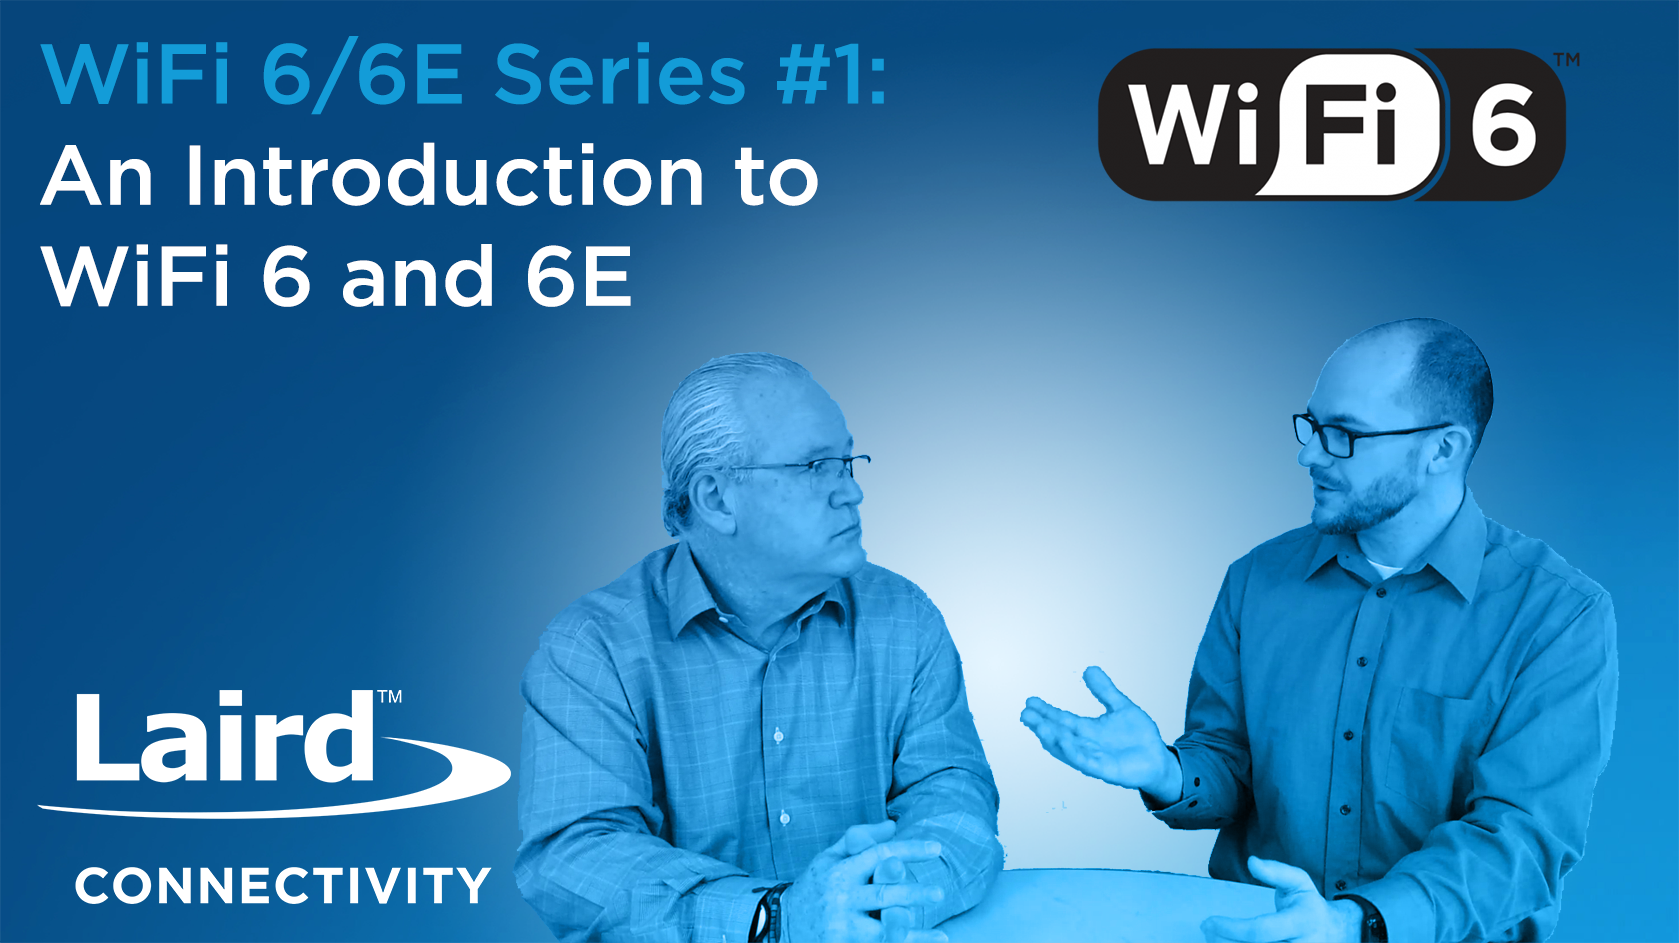 WiFi 6/6E Series #1: An Introduction to WiFi 6 and 6E